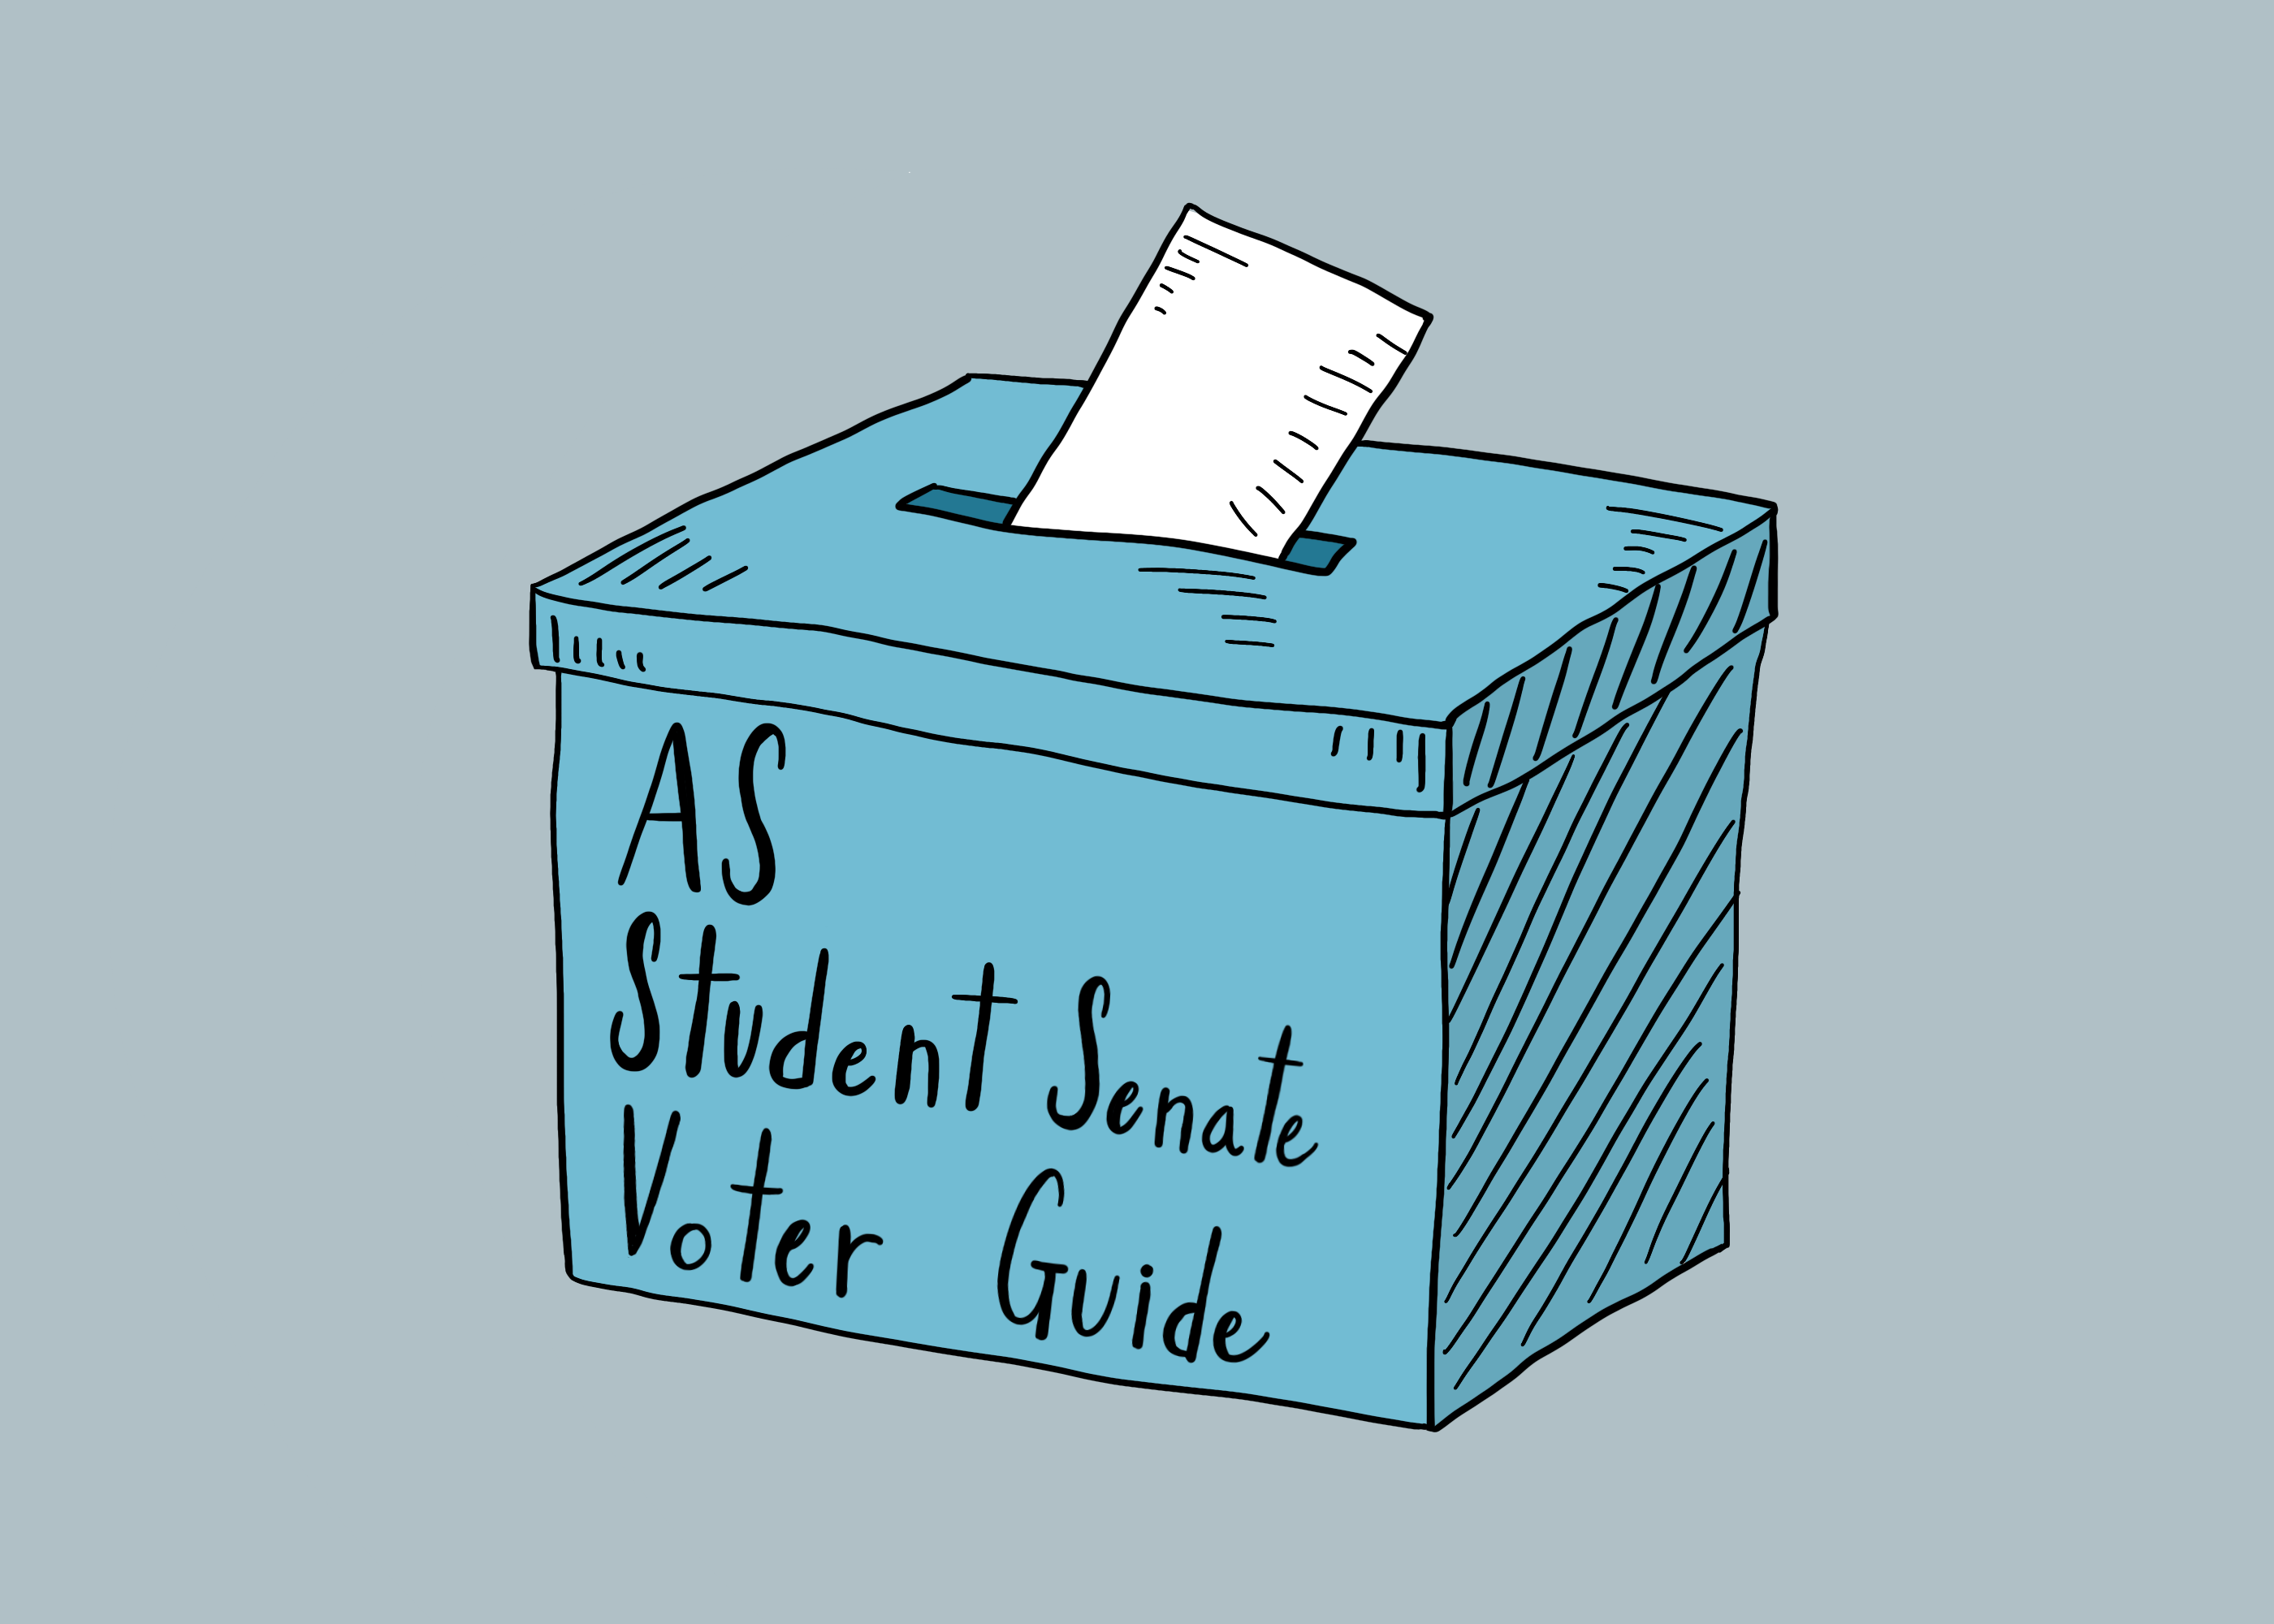 A hand-drawn graphic of a voting box with a ballot going in. "AS Student Senate Voter Guide" is written on the side.